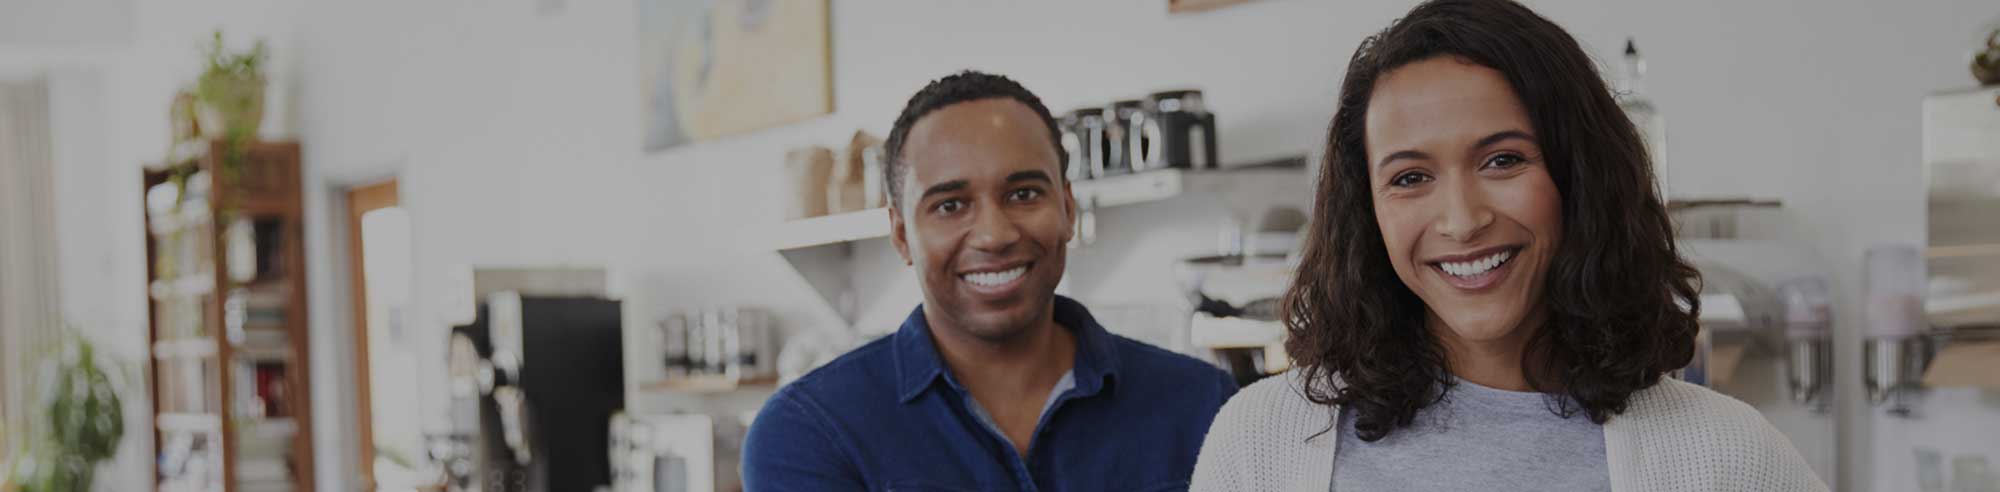 a man and woman smiling at the camera from their small business service counter